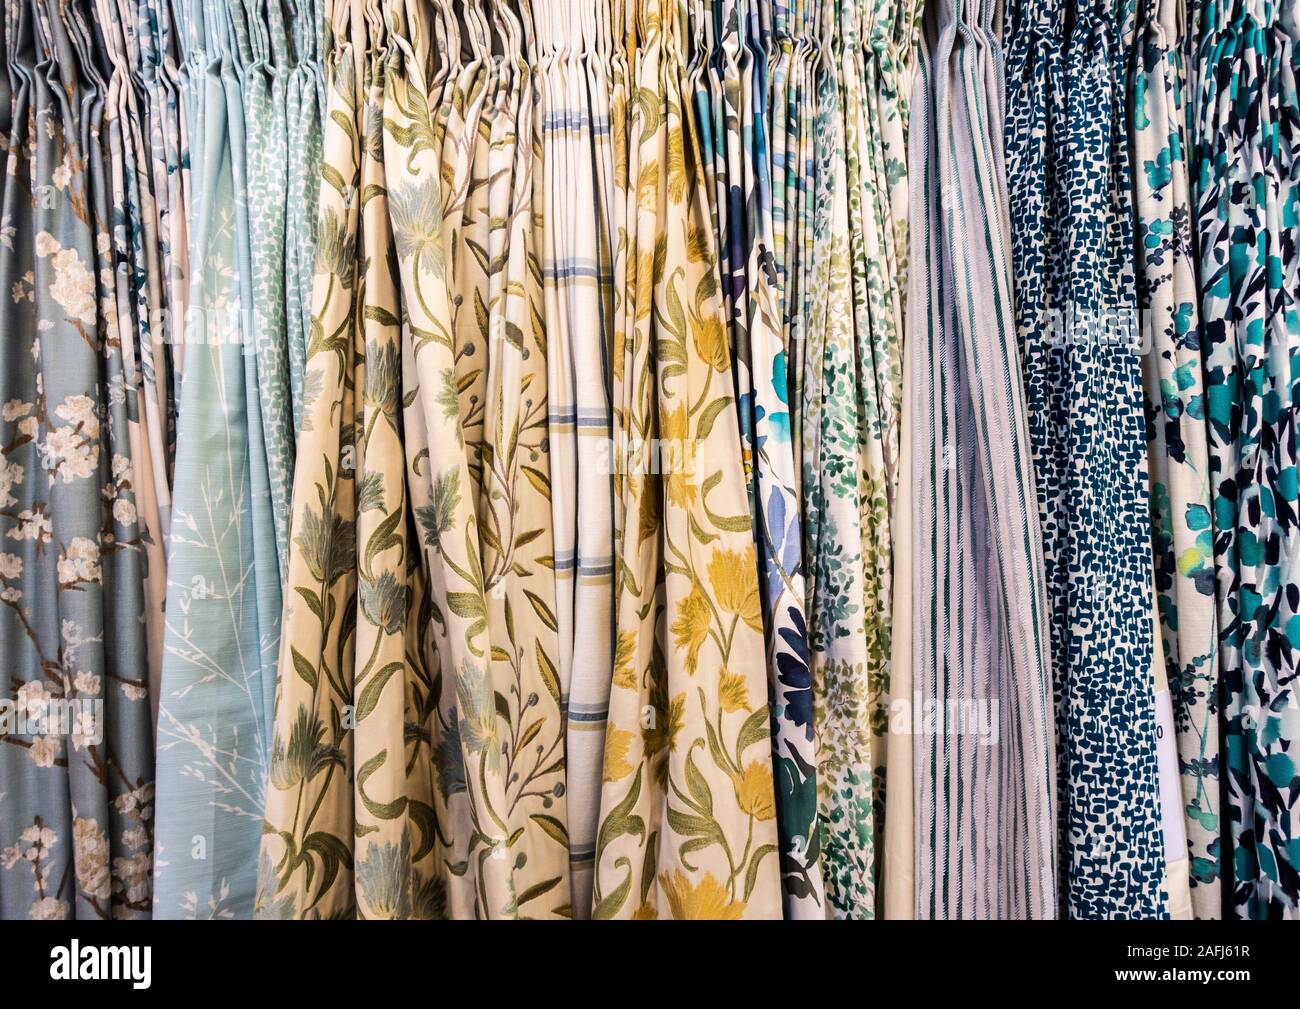 Curtain fabric display in department store Stock Photo - Alamy